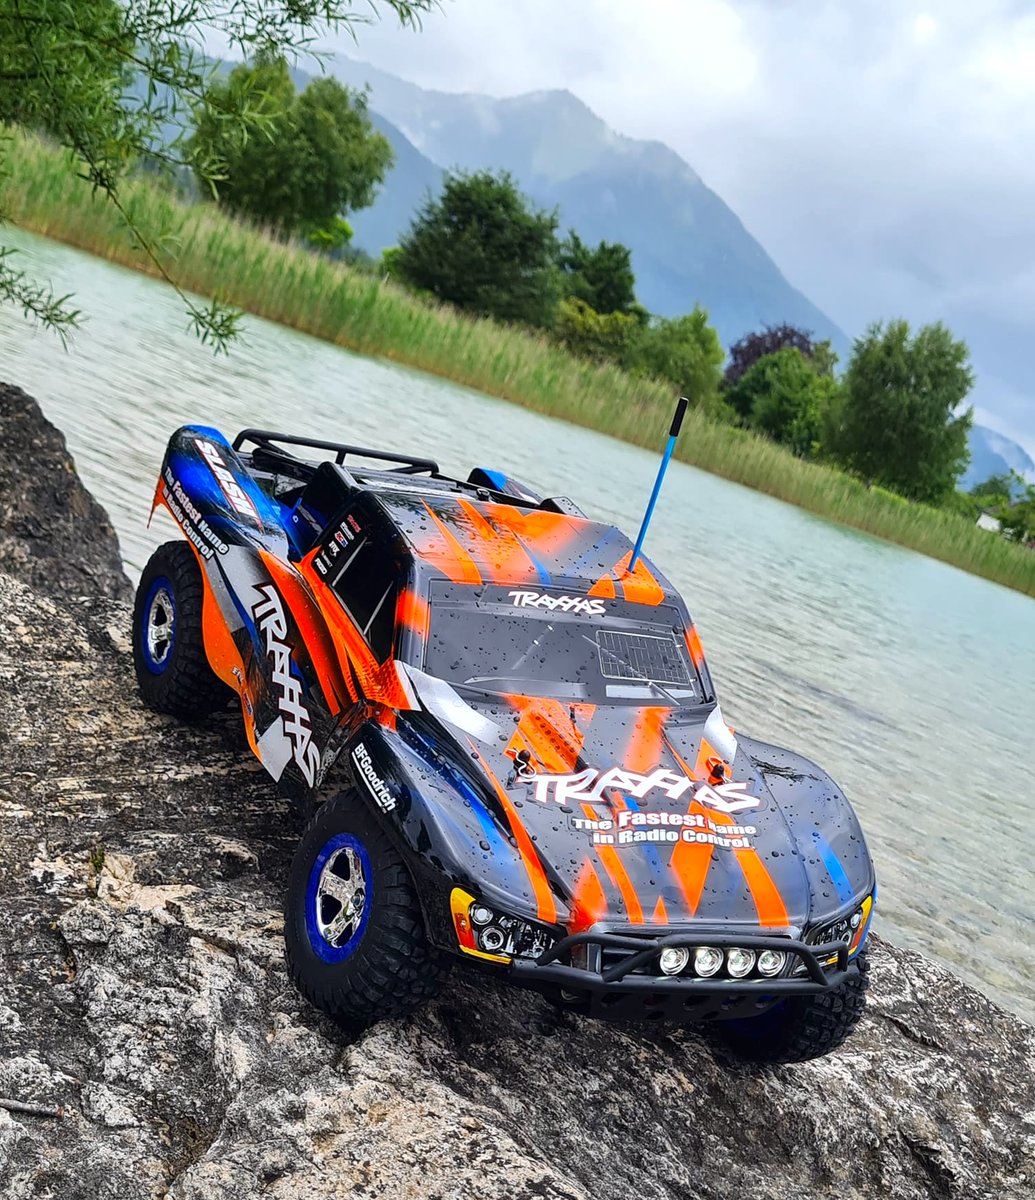 Rainy day? ☔️ No problem!
Slash features waterproof electronics for all-weather driving excitement. Add a #Traxxas LED Light Kit & keep the fun going into night! 💡 [Part #5894]

[Model # 58034-8 / 58134-4] #TraxxasSlash
#FastestNameInRadioControl
#TraxxasFanPhoto 📸: Sven Sauter